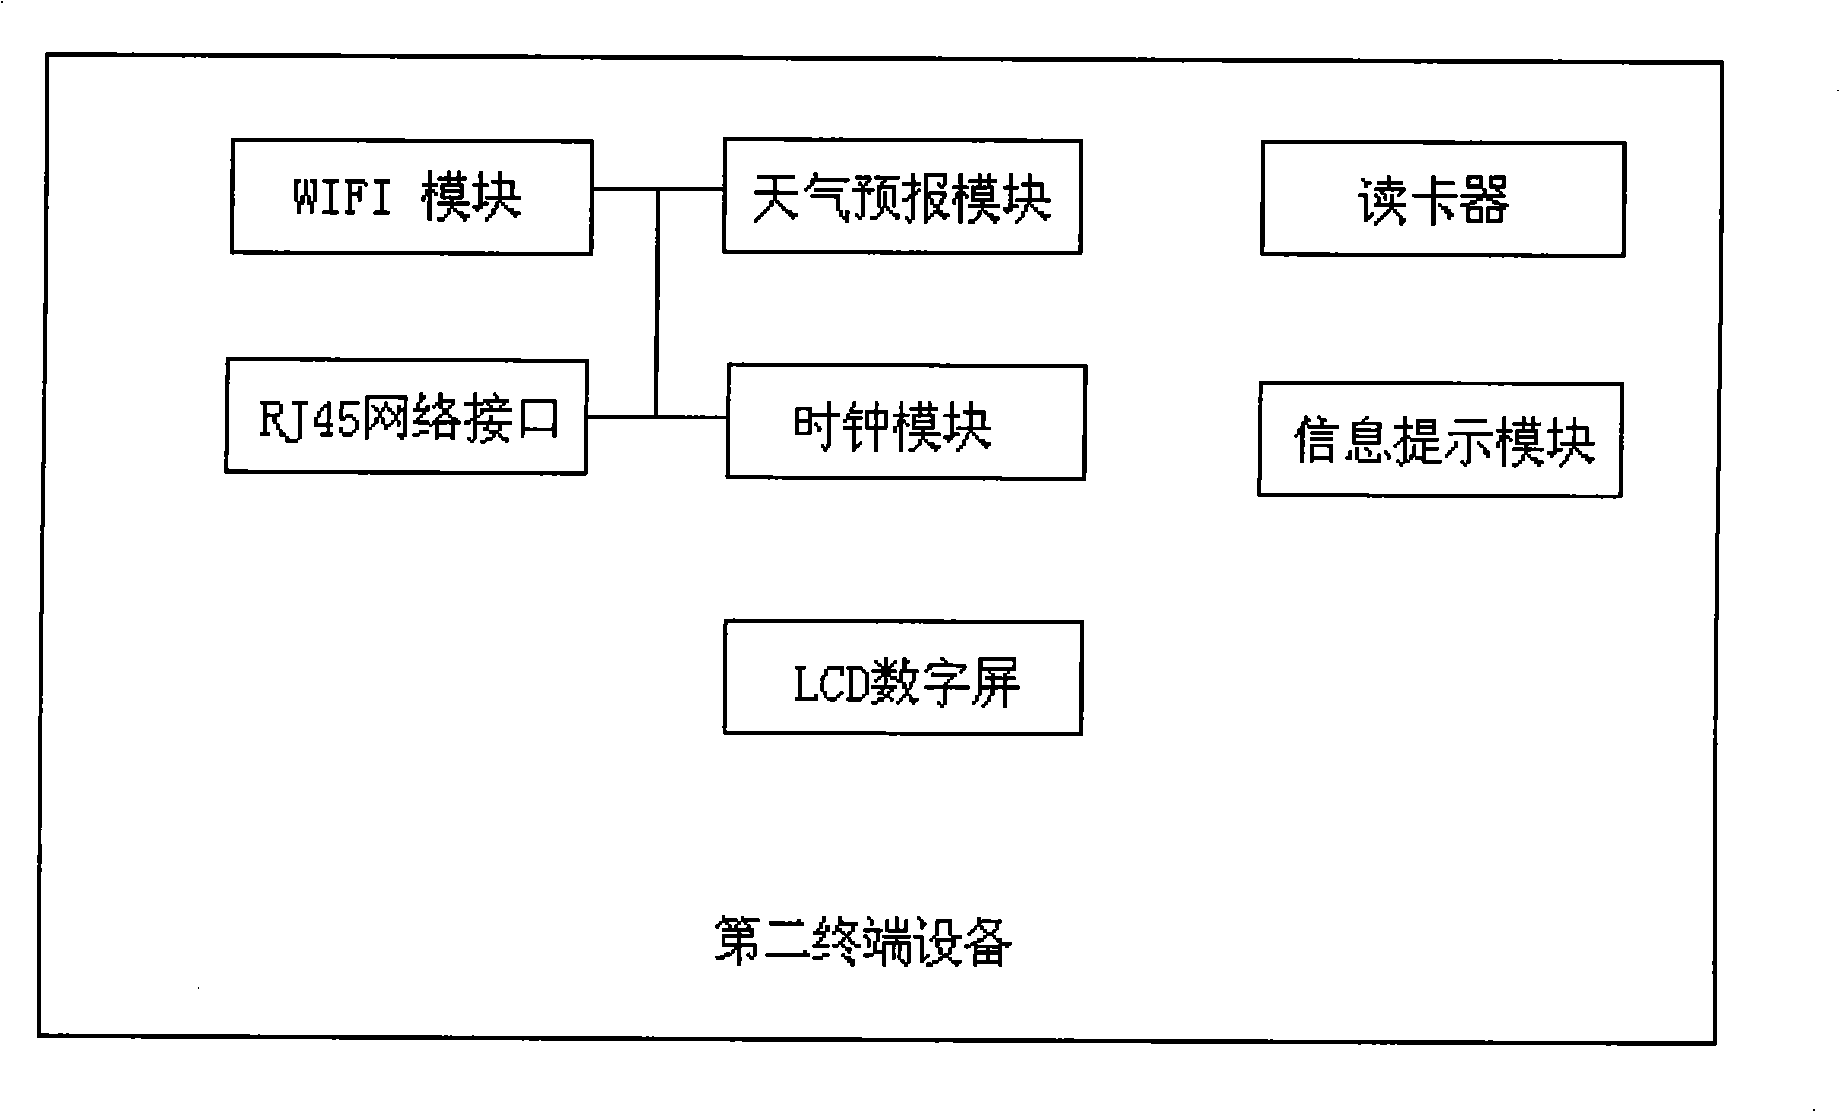 Network content sharing system and method